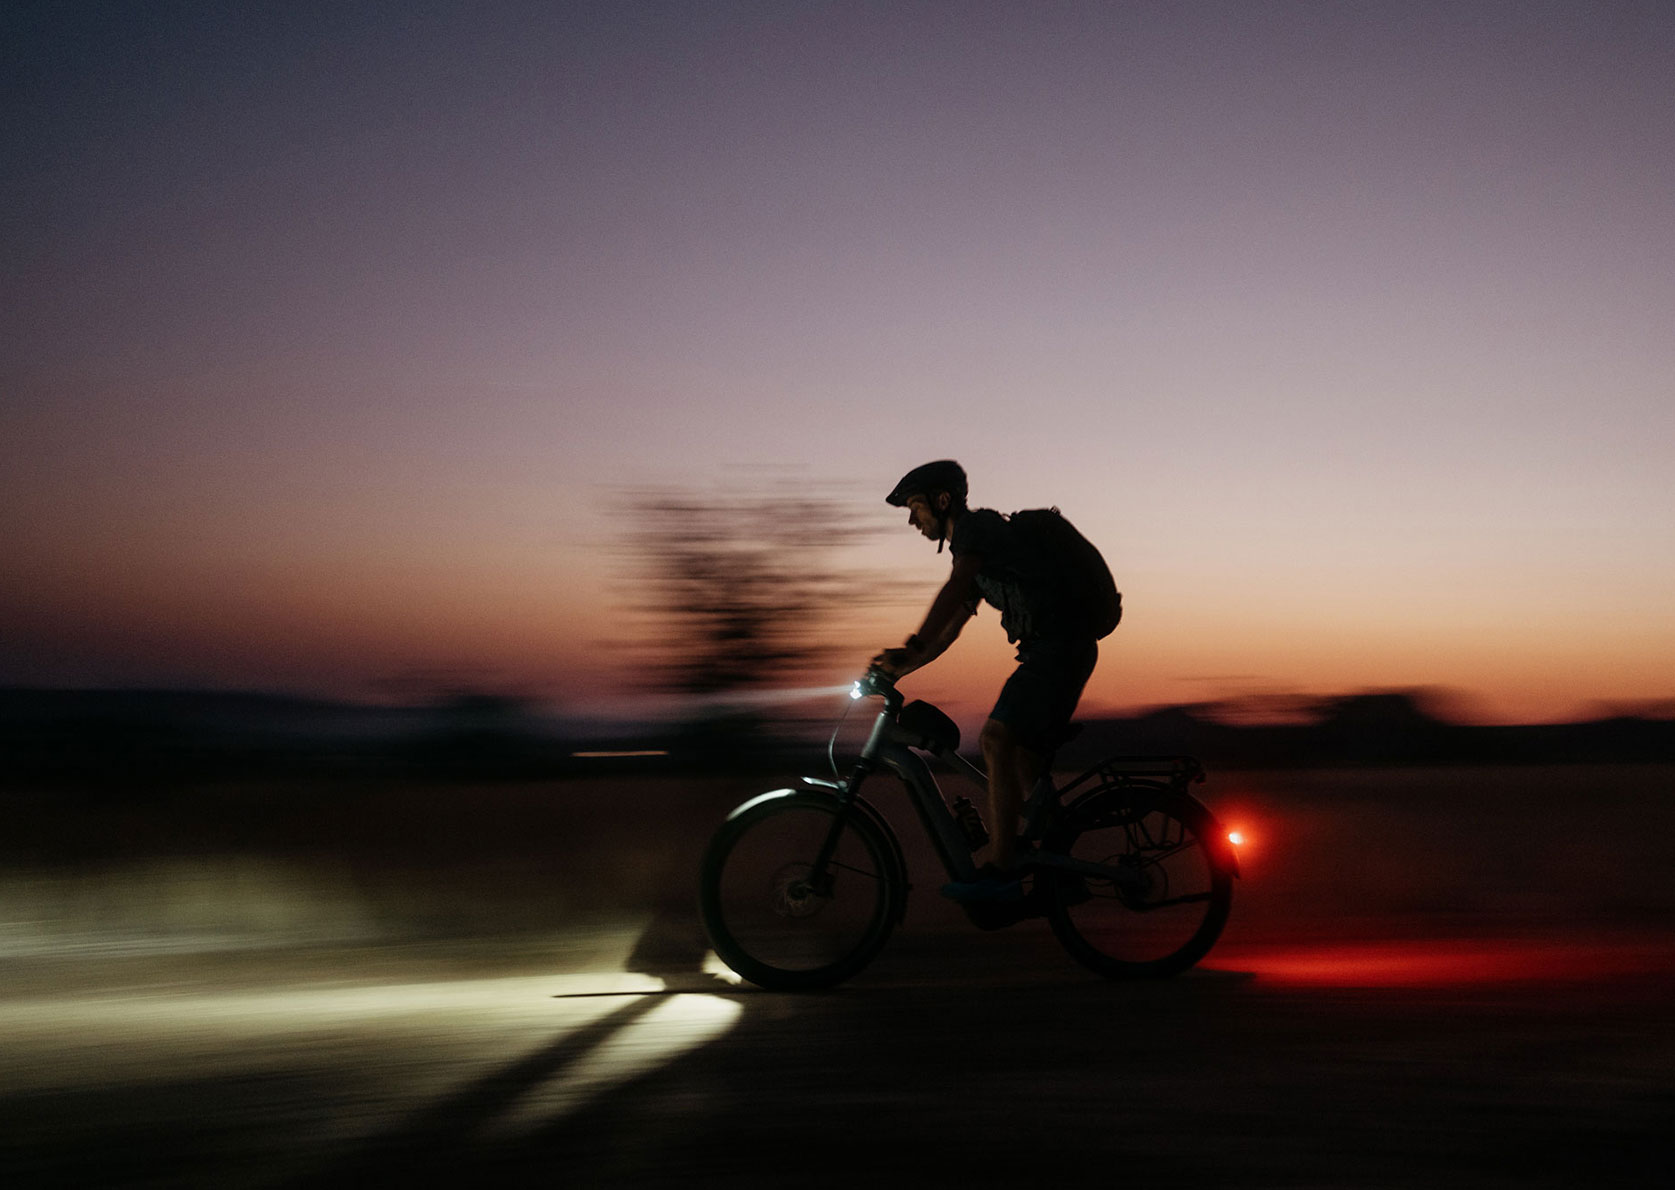 Panned image of a cyclist in darkness